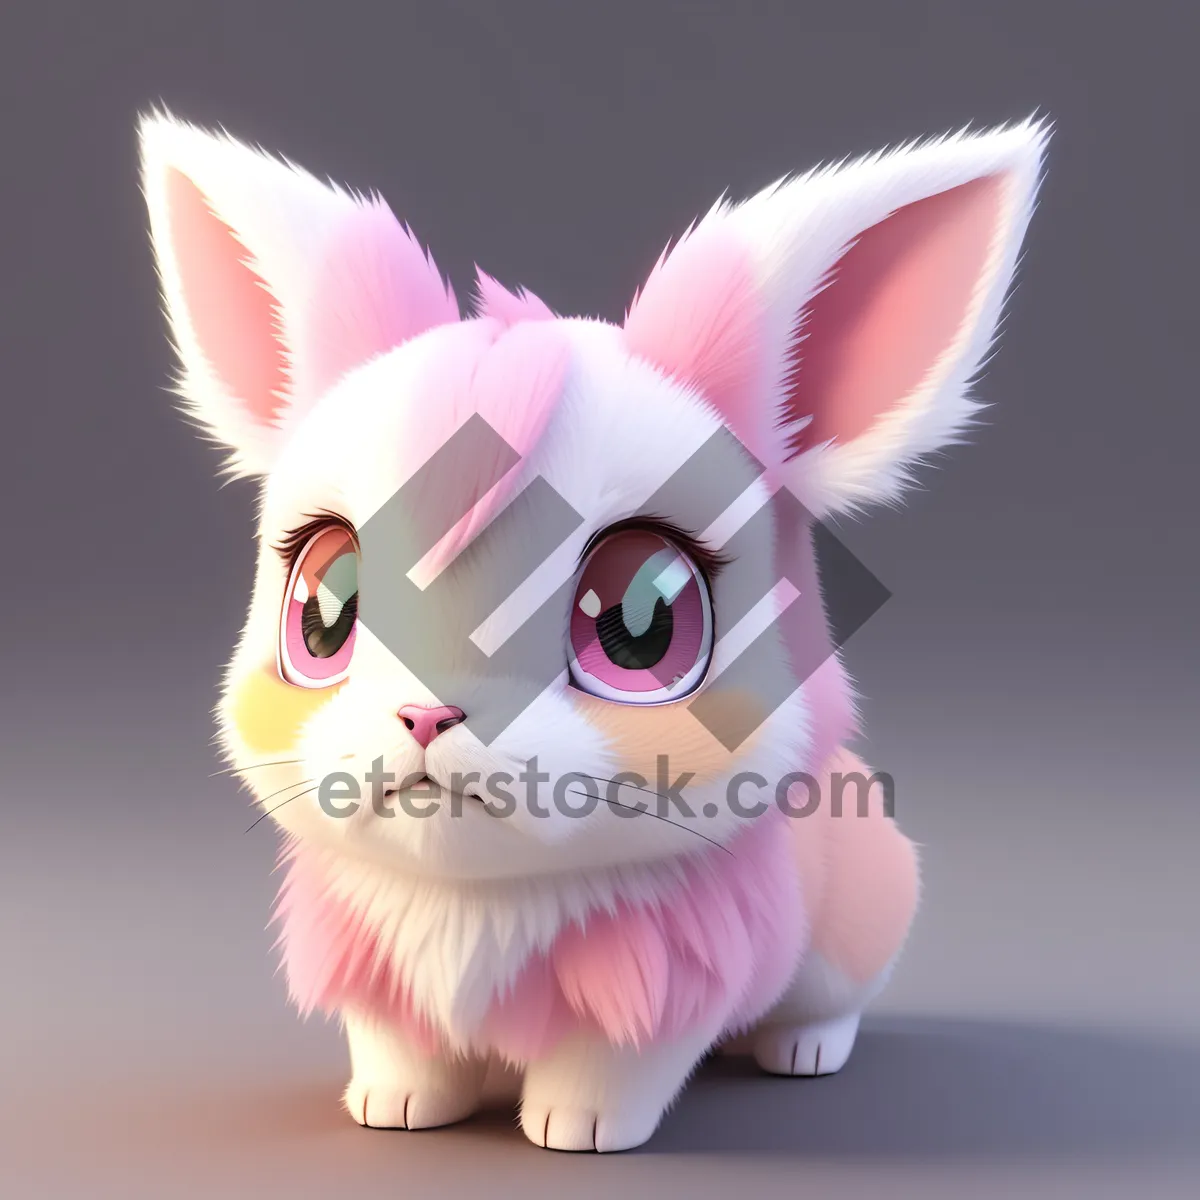 Picture of Bunny Rabbit Savings Bank - Furry Pet with Cute Ears